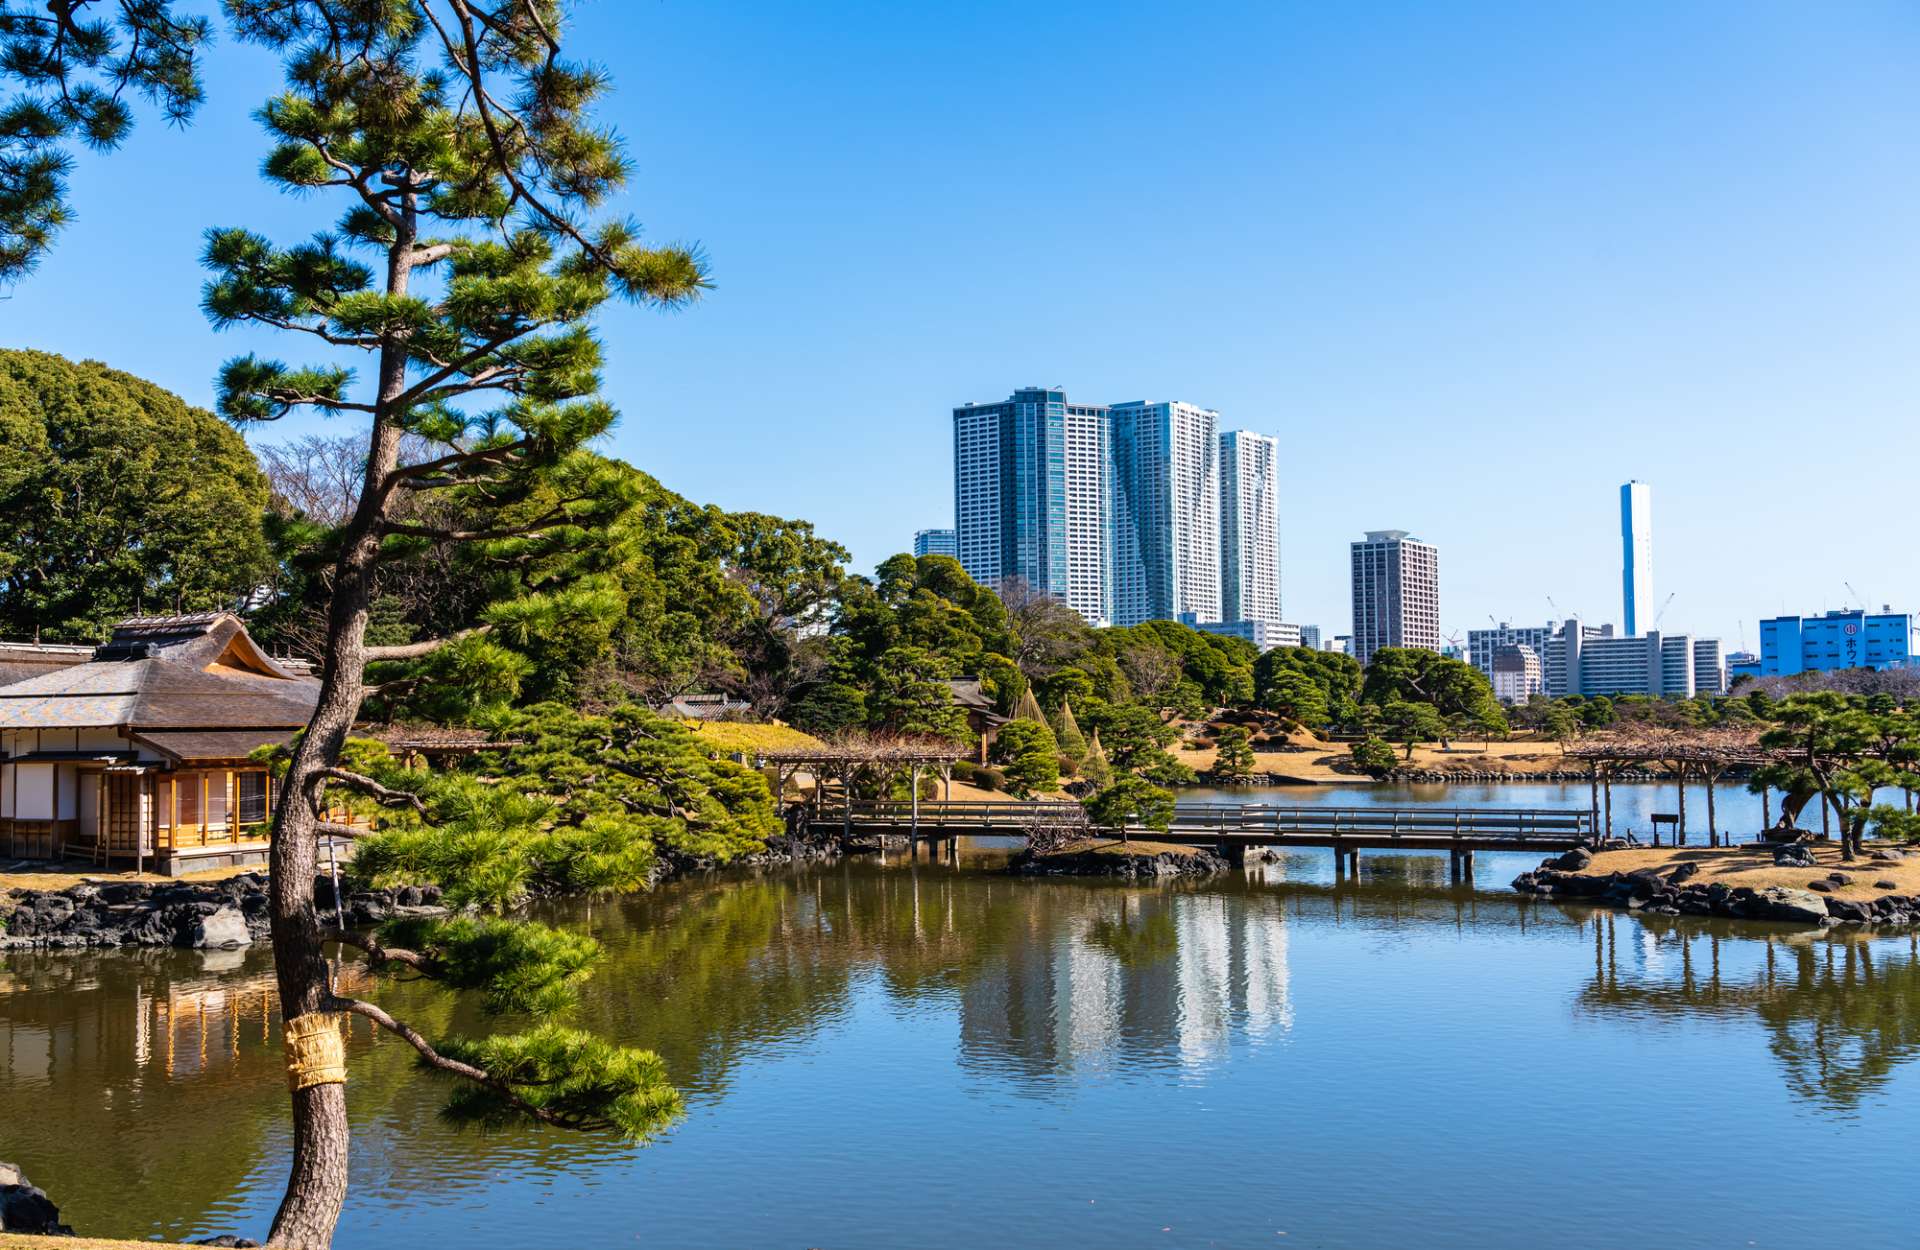 Hama Rikyu Gardens Must See Trip Plans Access Hours Price Good Luck Trip